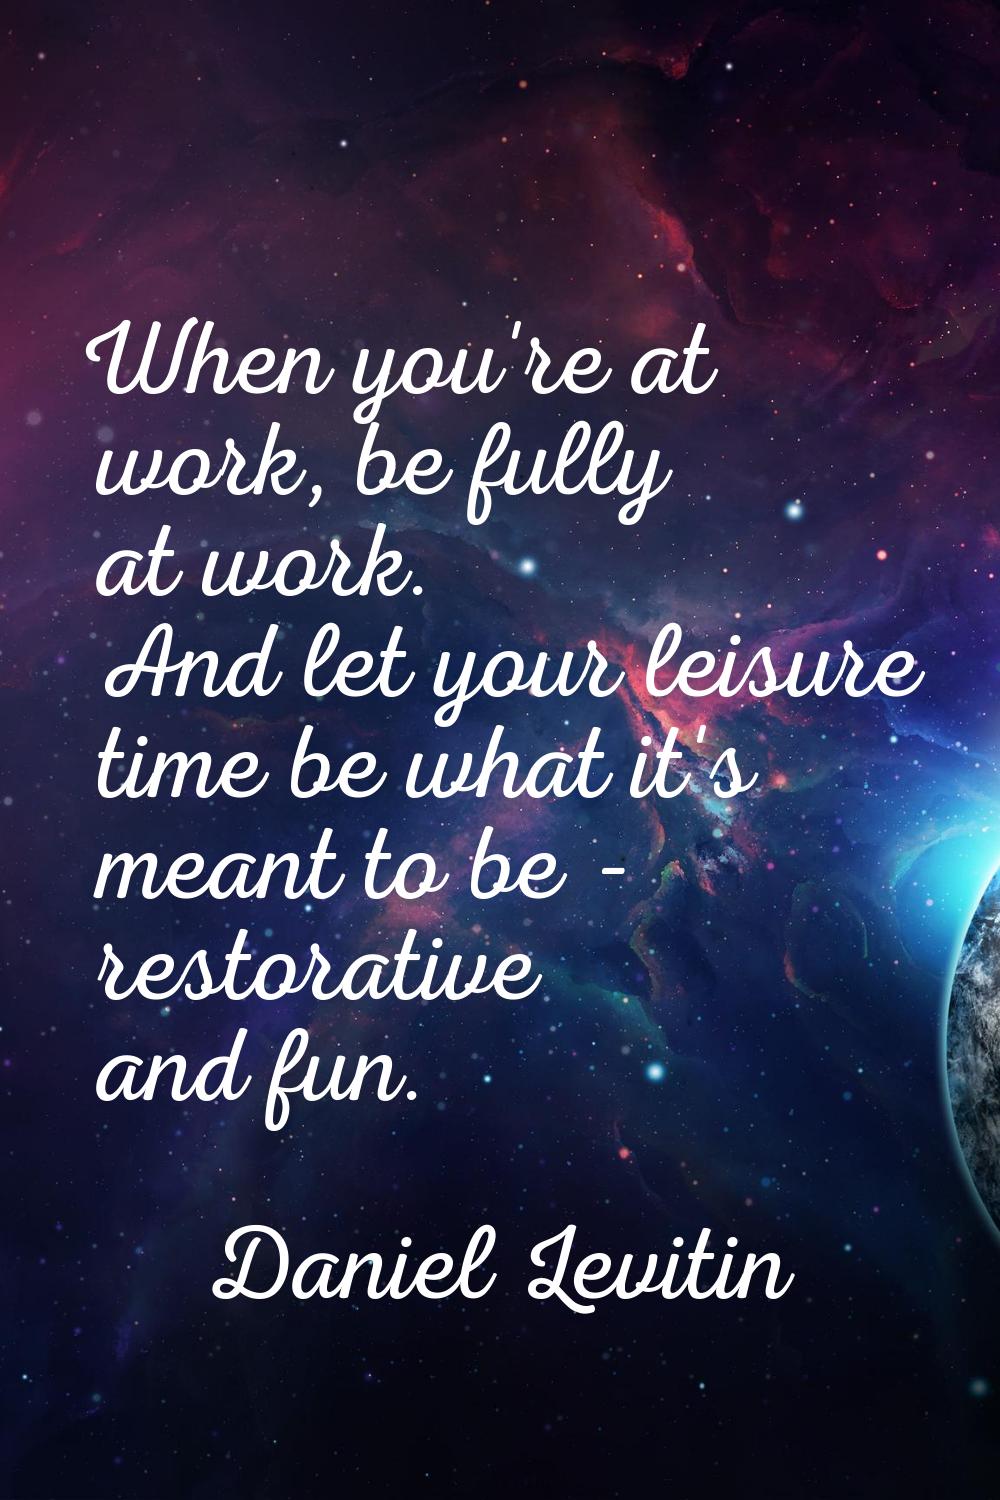 When you're at work, be fully at work. And let your leisure time be what it's meant to be - restora